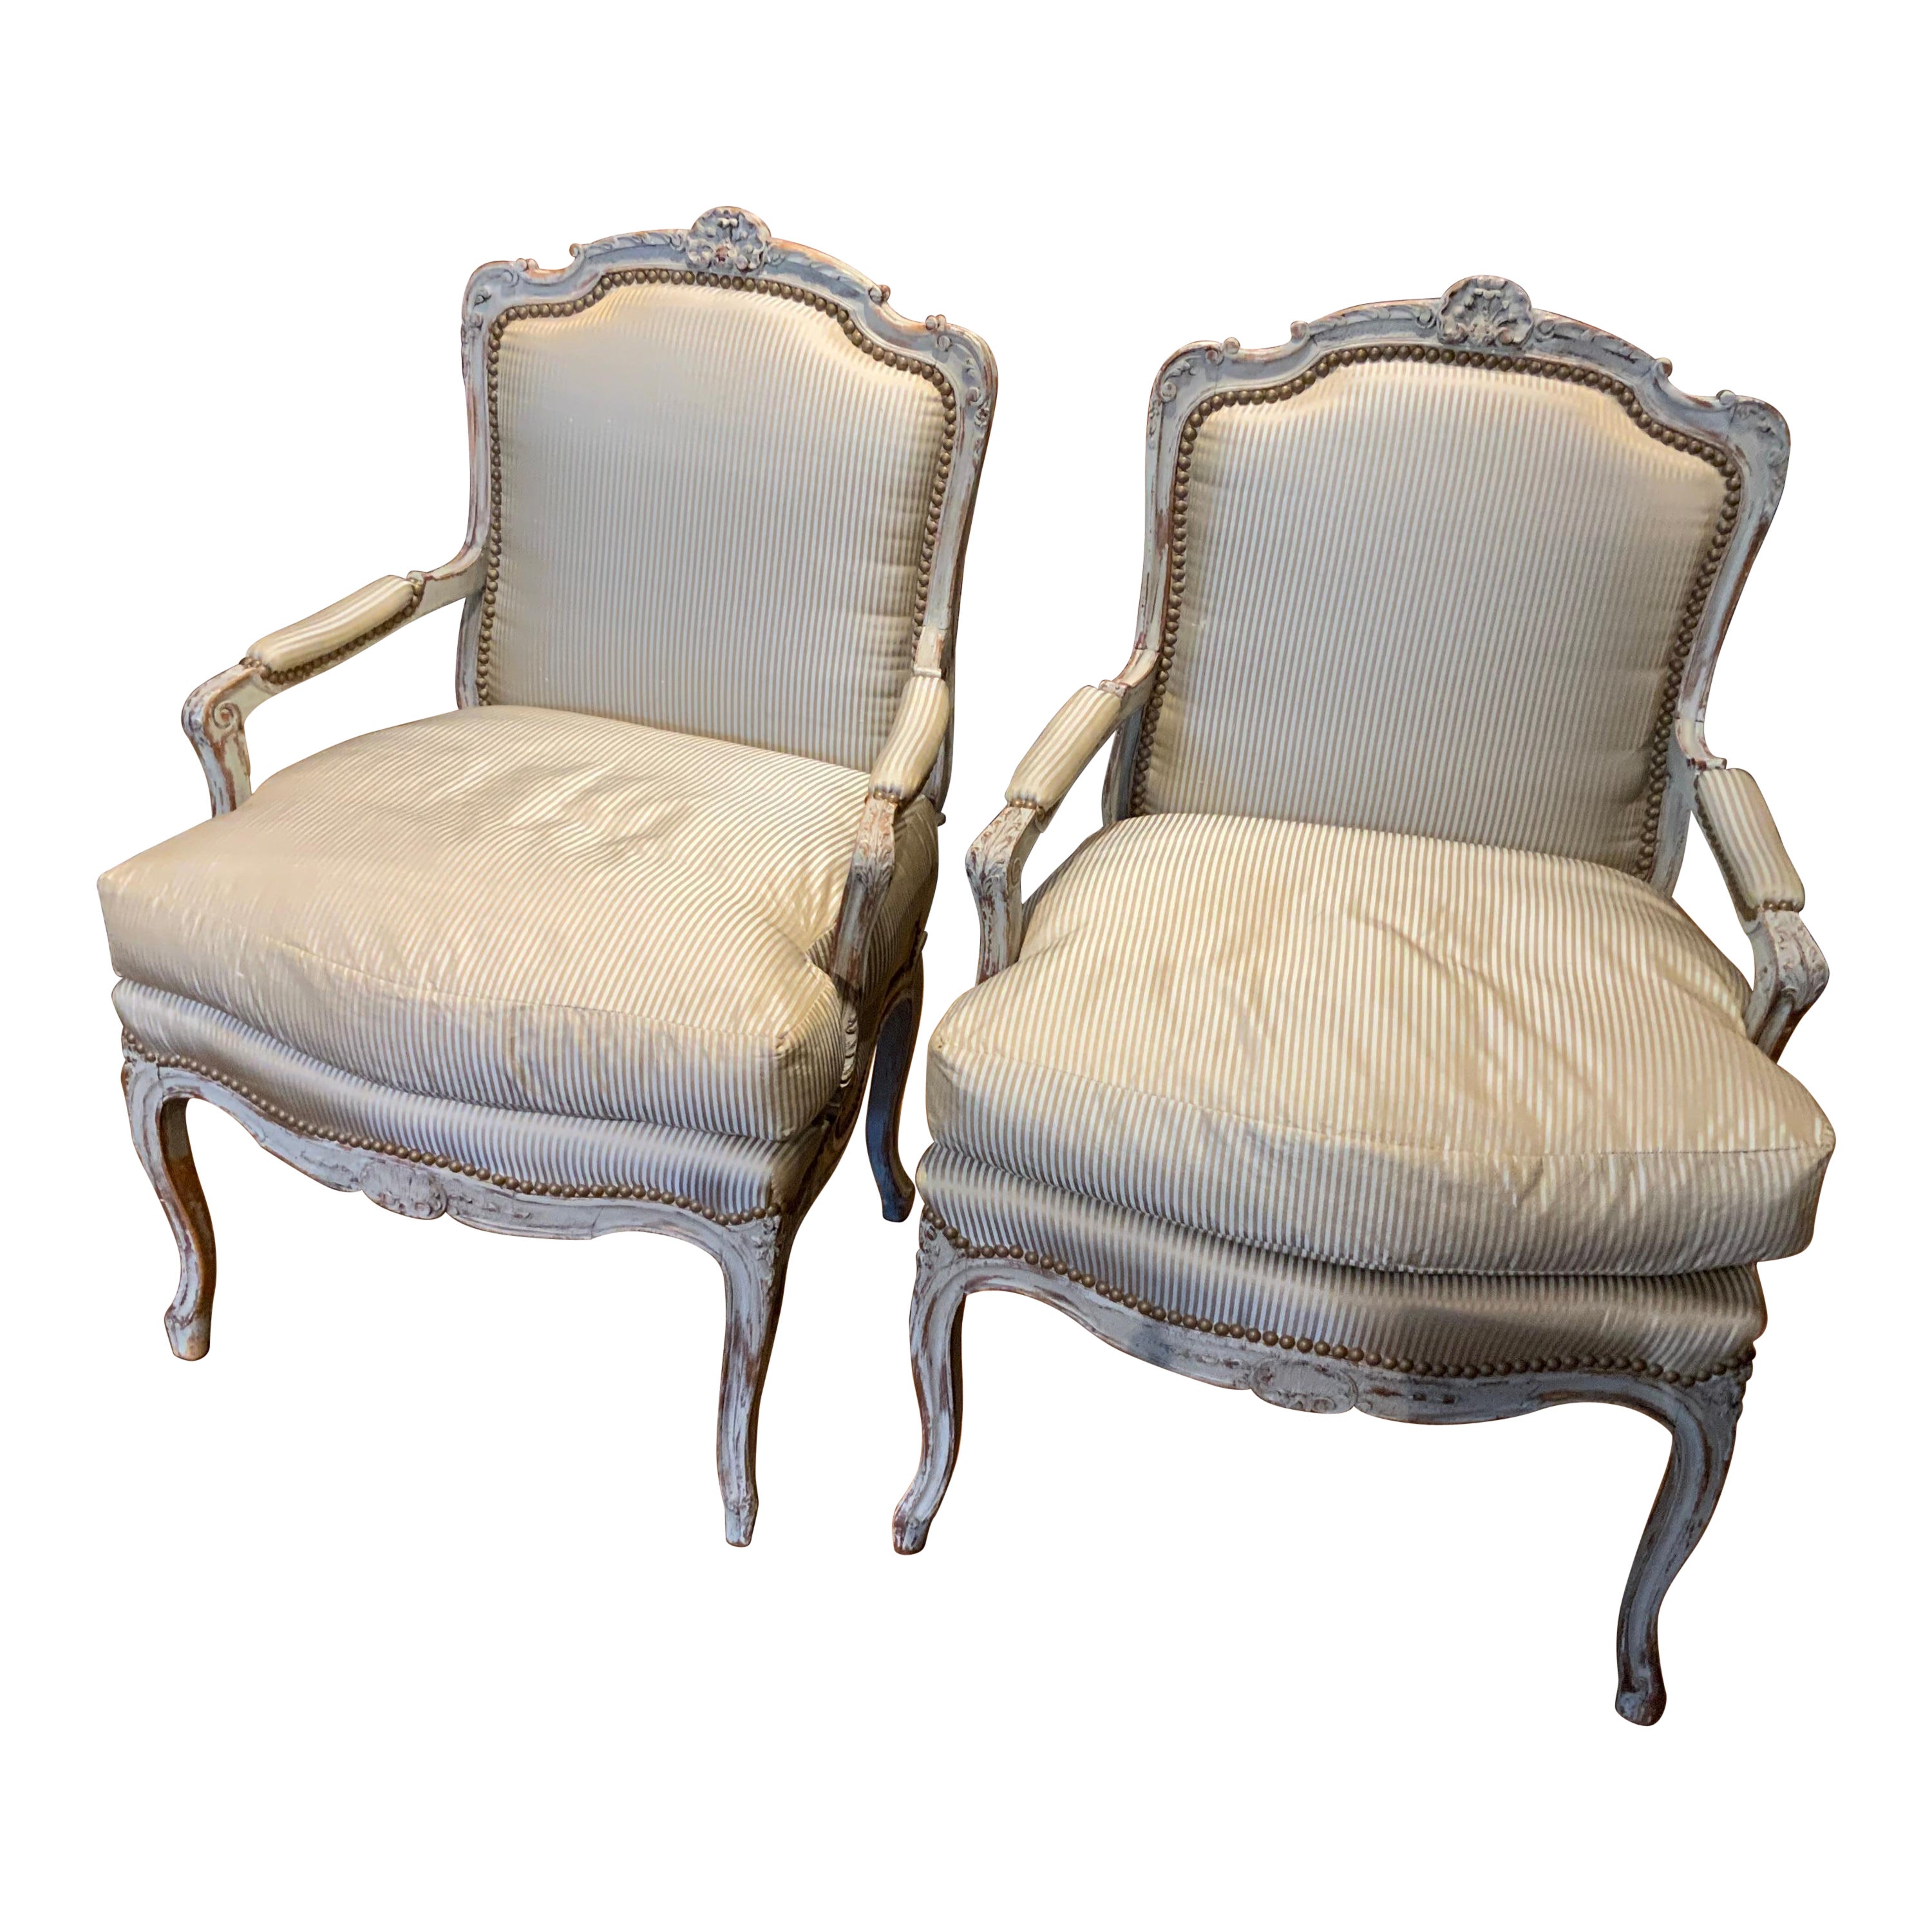 Pair of Louis XV Style Arm Chairs/Fauteuils in Painted Finish with Silk Fabric